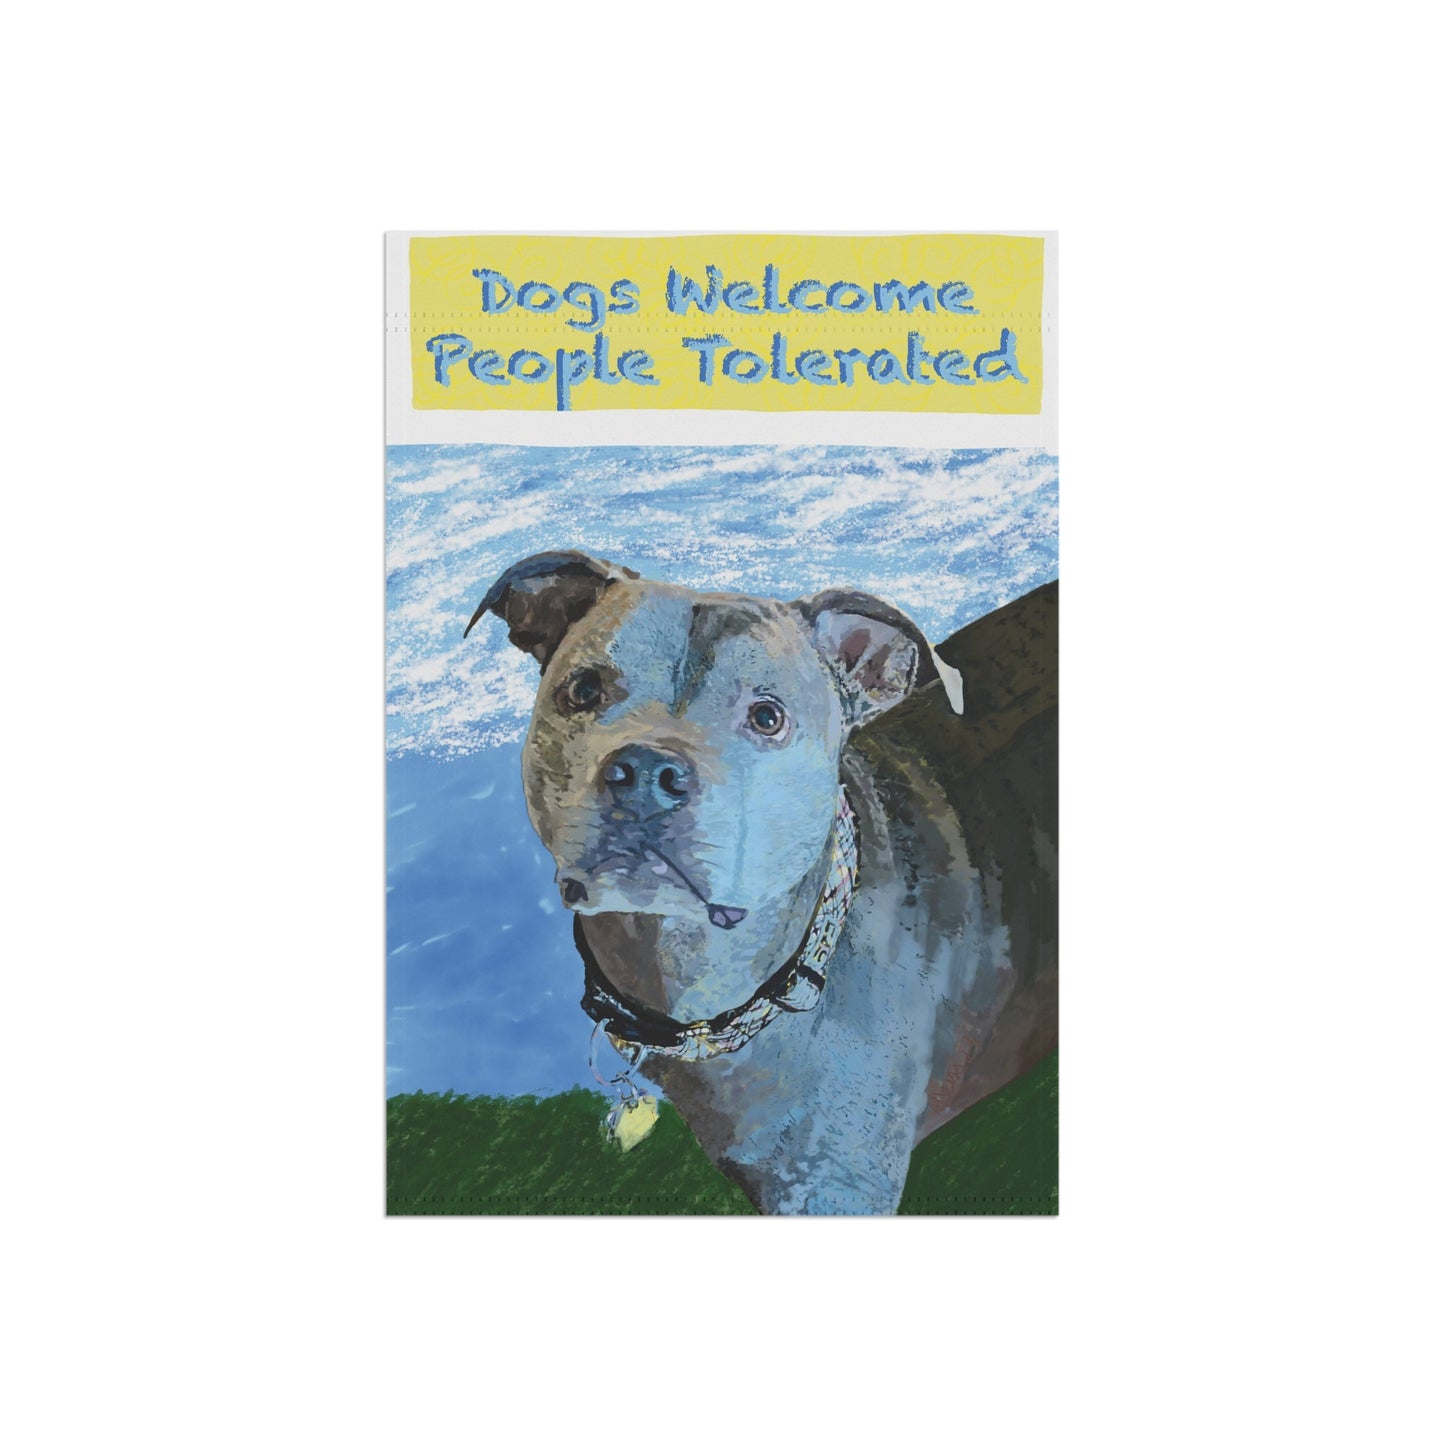 Dogs Welcome People Tolerated Garden & House Banner - Blue Cava